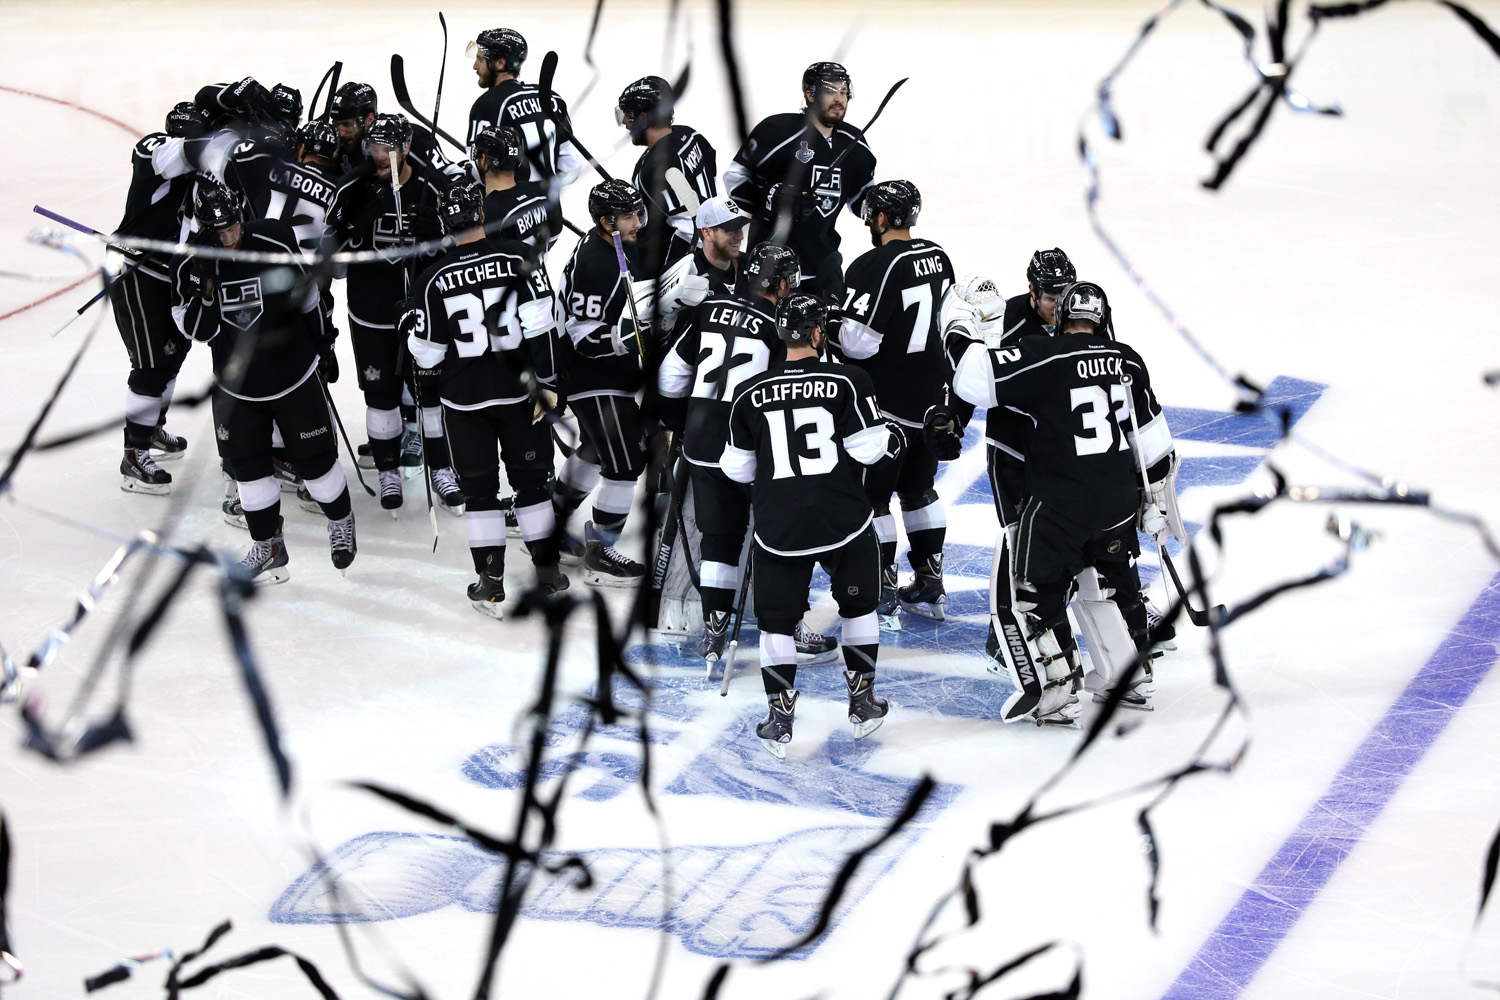 The Los Angeles Kings  celebrate their overtime game-winning goal against the New York Rangers during Game One of the 2014 NHL Stanley Cup Final in Los Angeles on June 4, 2014.